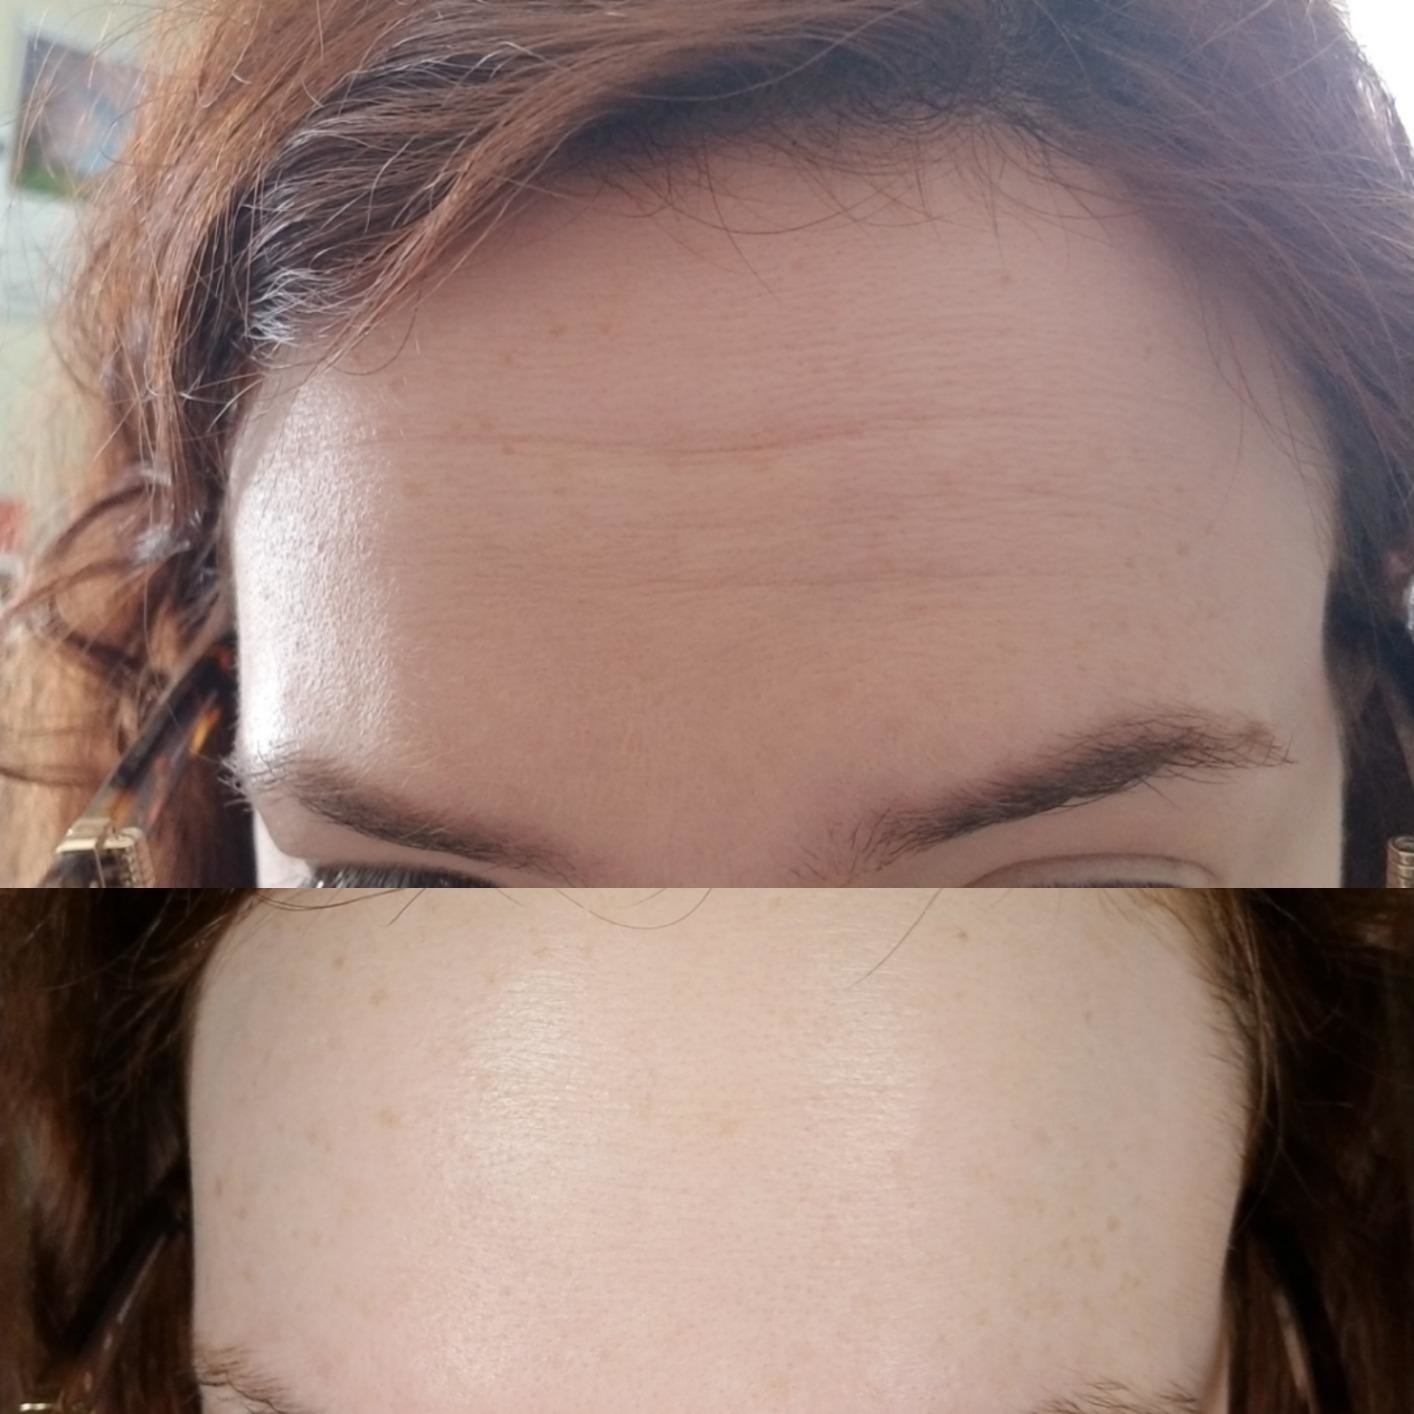 reviewer&#x27;s forehead before and after using the mask with a much more tightened look in the after